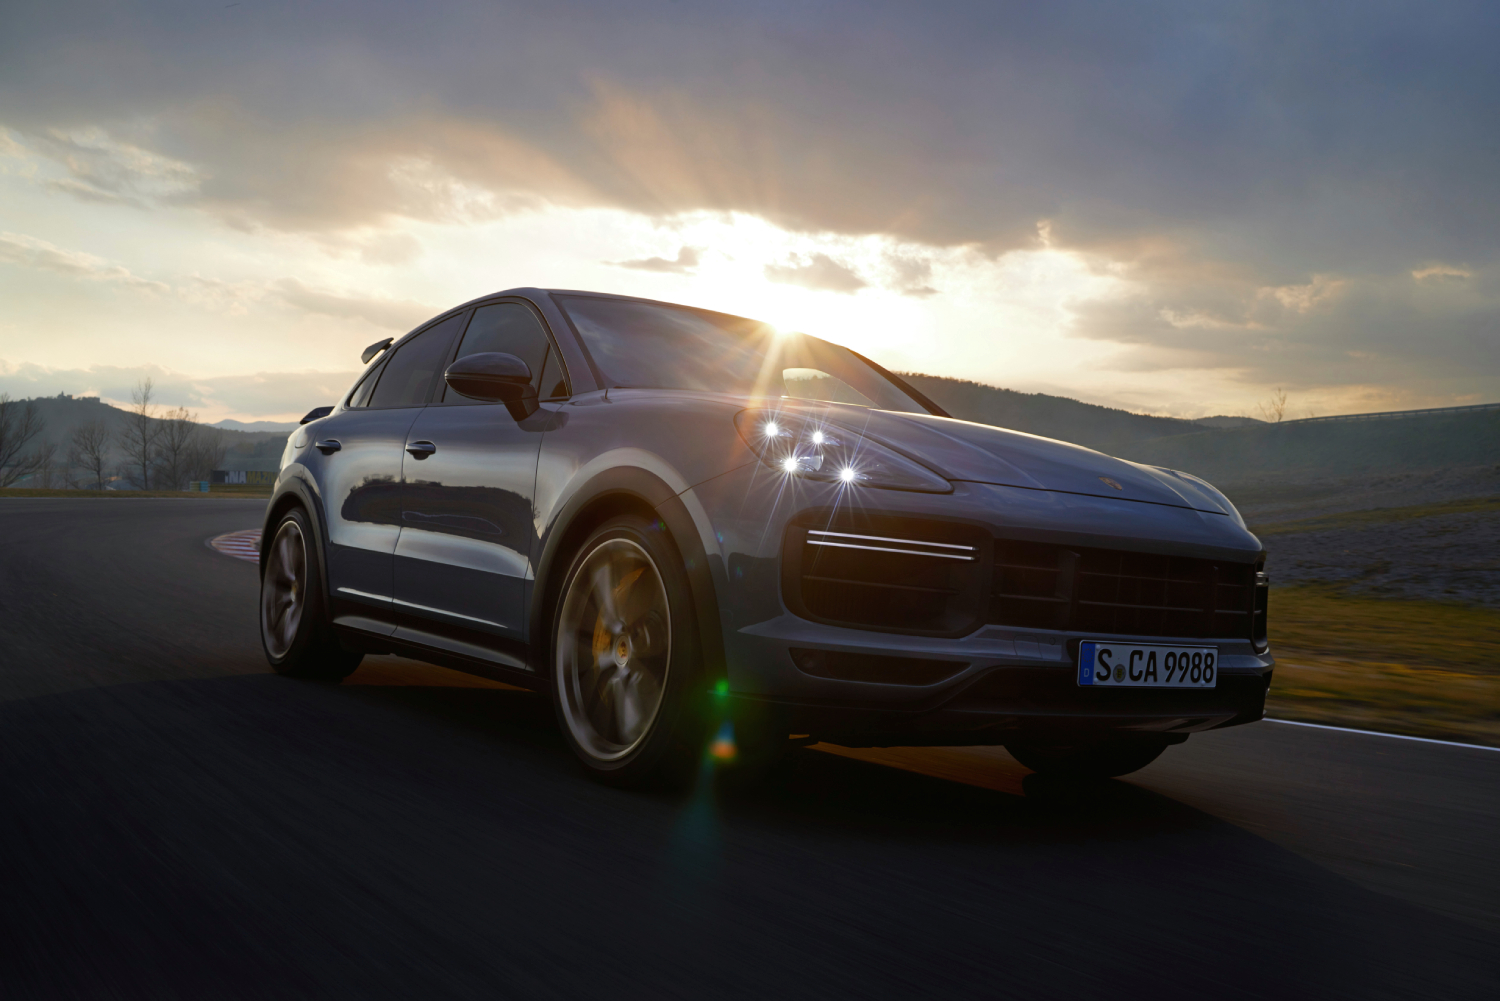 The Porsche Cayenne is one of Consumer Reports best SUVs for tall drivers